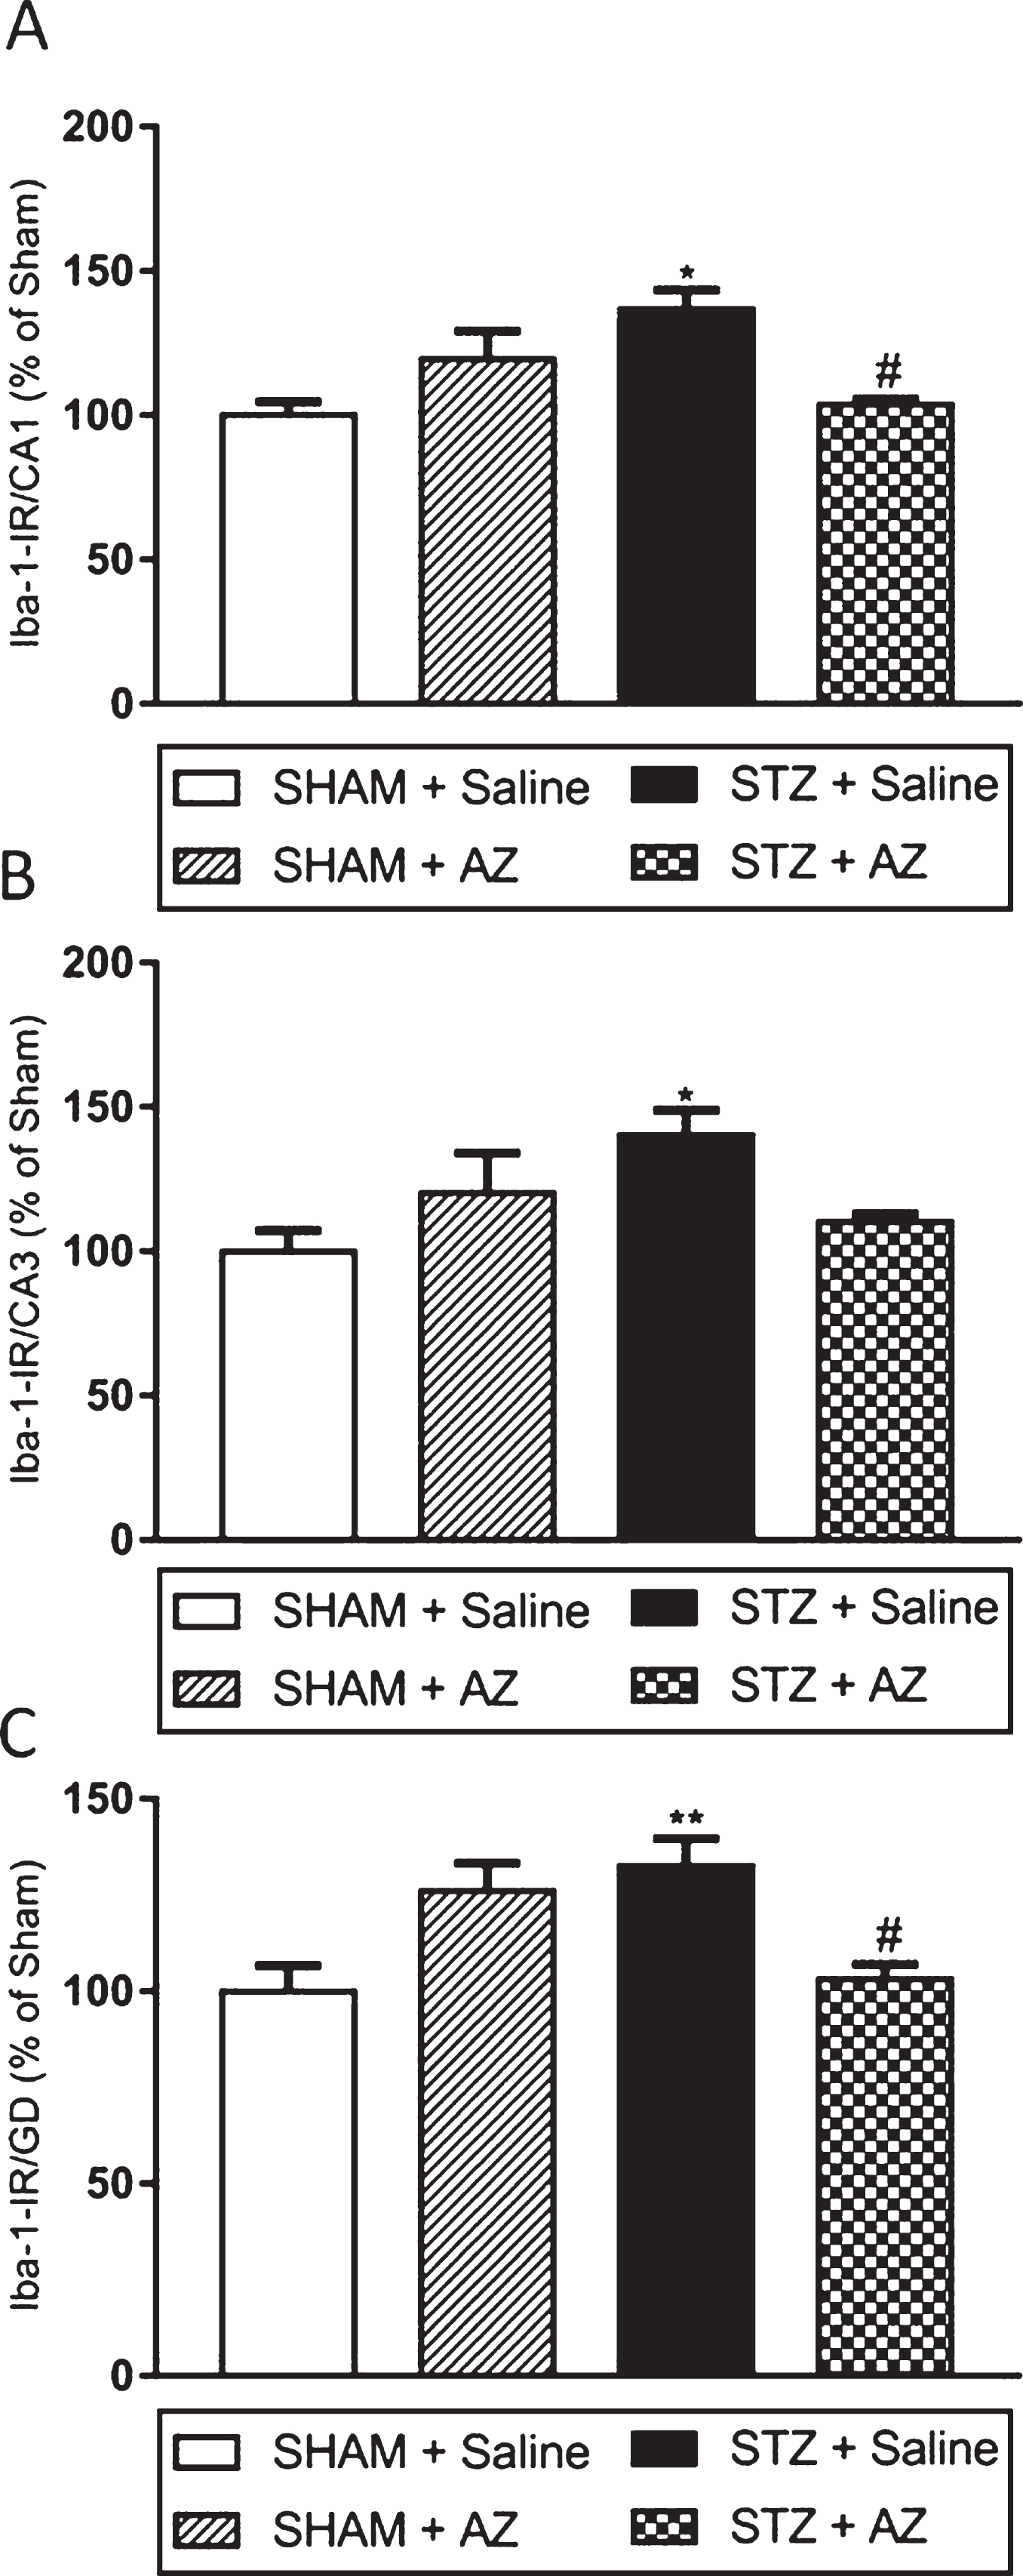 Effects of AZ1 formulation on microglial cells (IBA1 immunoreactivity) on STZ-ICV-injected animals. IBA1-IR significantly increased in CA1 region 30 days after surgery in STZ-ICV-injected rats. The treatment with AZ1 formulation at a dose of 1 g/kg reduced IBA-IR in hippocampal regions CA1 (A) and DG (C) but showed no significant results in CA3 region (B). The data are shown as mean±SEM; n = 4–6 per group; *p < 0.05; **p < 0.01 versus sham + saline group; #
p < 0.05 versus STZ + saline group (one-way ANOVA with Bonferroni’s post-hoc test on IBA1 immunoreactivity in the CA3 and GD regions, and Kruskal Wallis with Dunn’s post-hoc test for the hippocampus CA1 region).